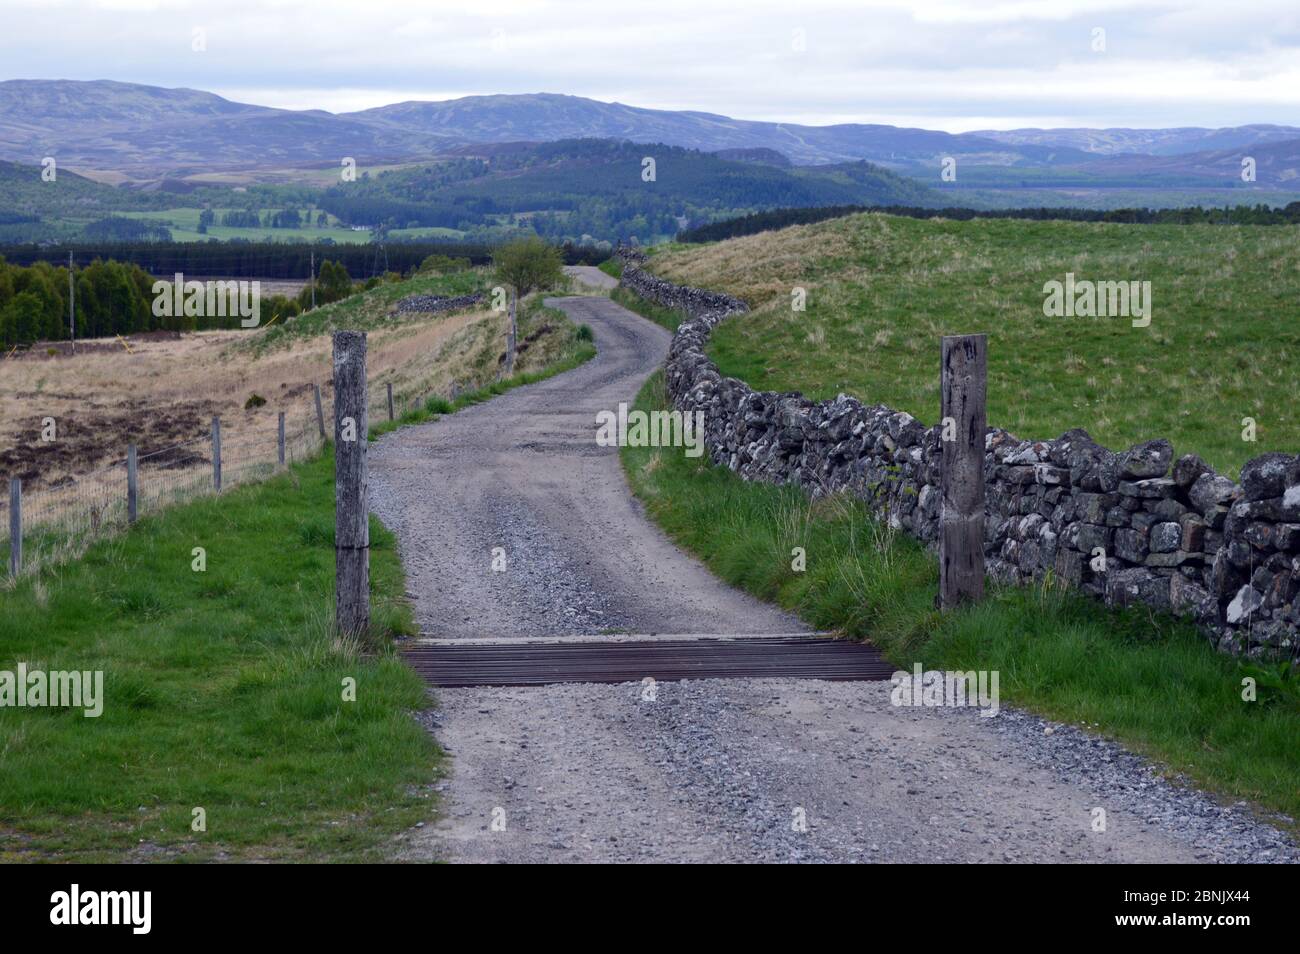 Start of the Track in Glen Tromie by Tromie Bridge for Altholl/Gaick & Minigaig Passes and Badenoch Way to Insh, Cairngorms National Park, Scotland. Stock Photo